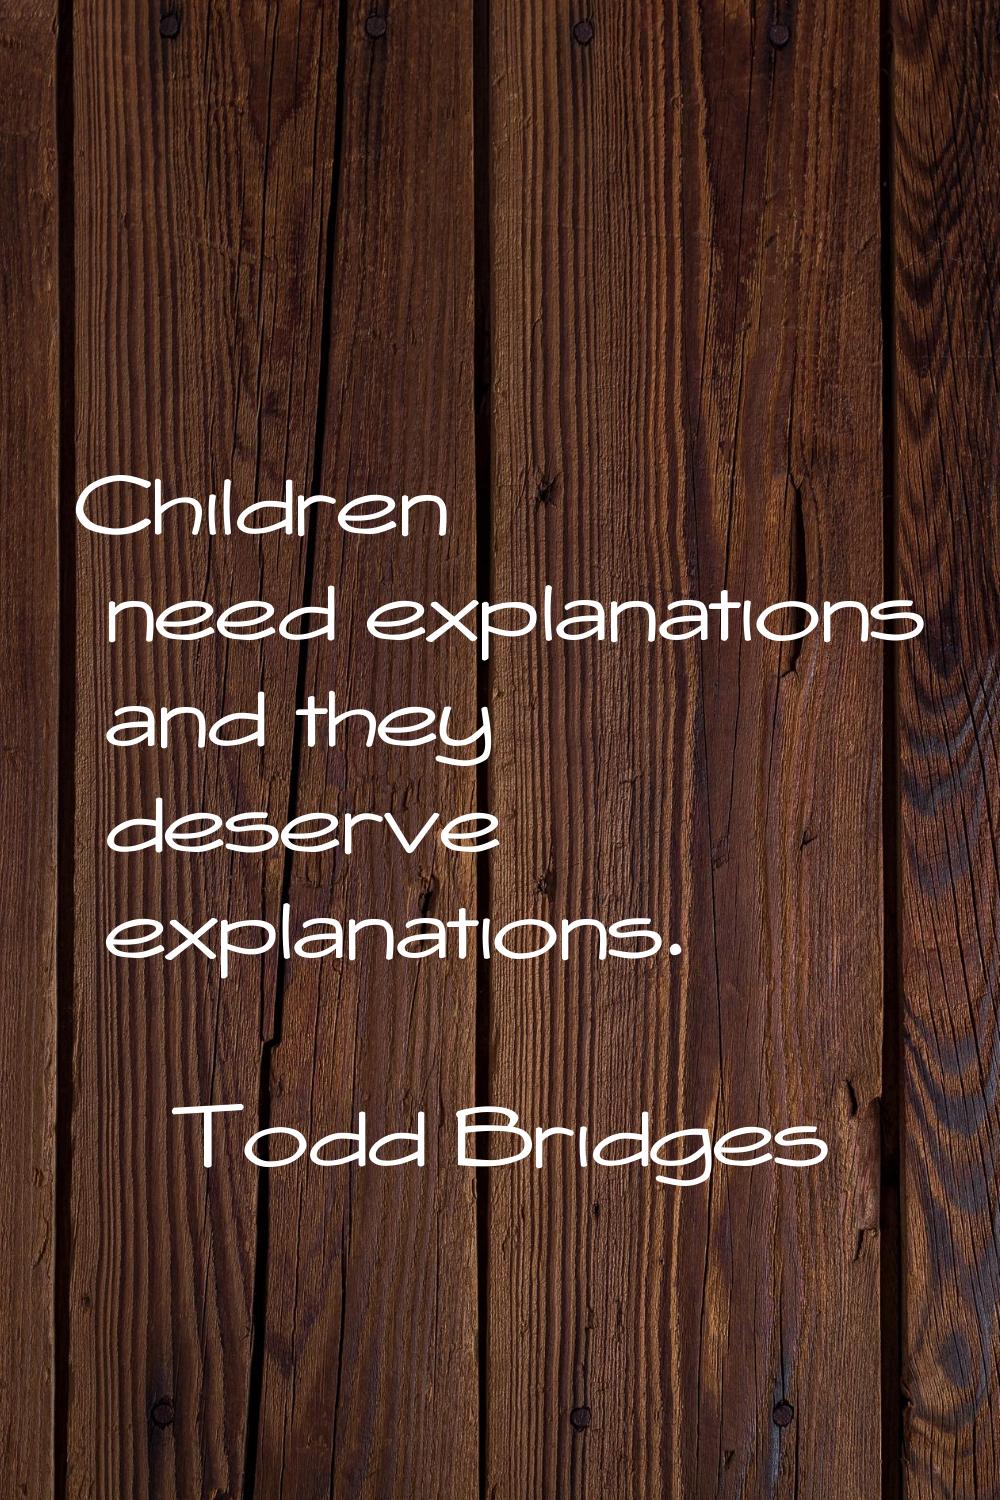 Children need explanations and they deserve explanations.